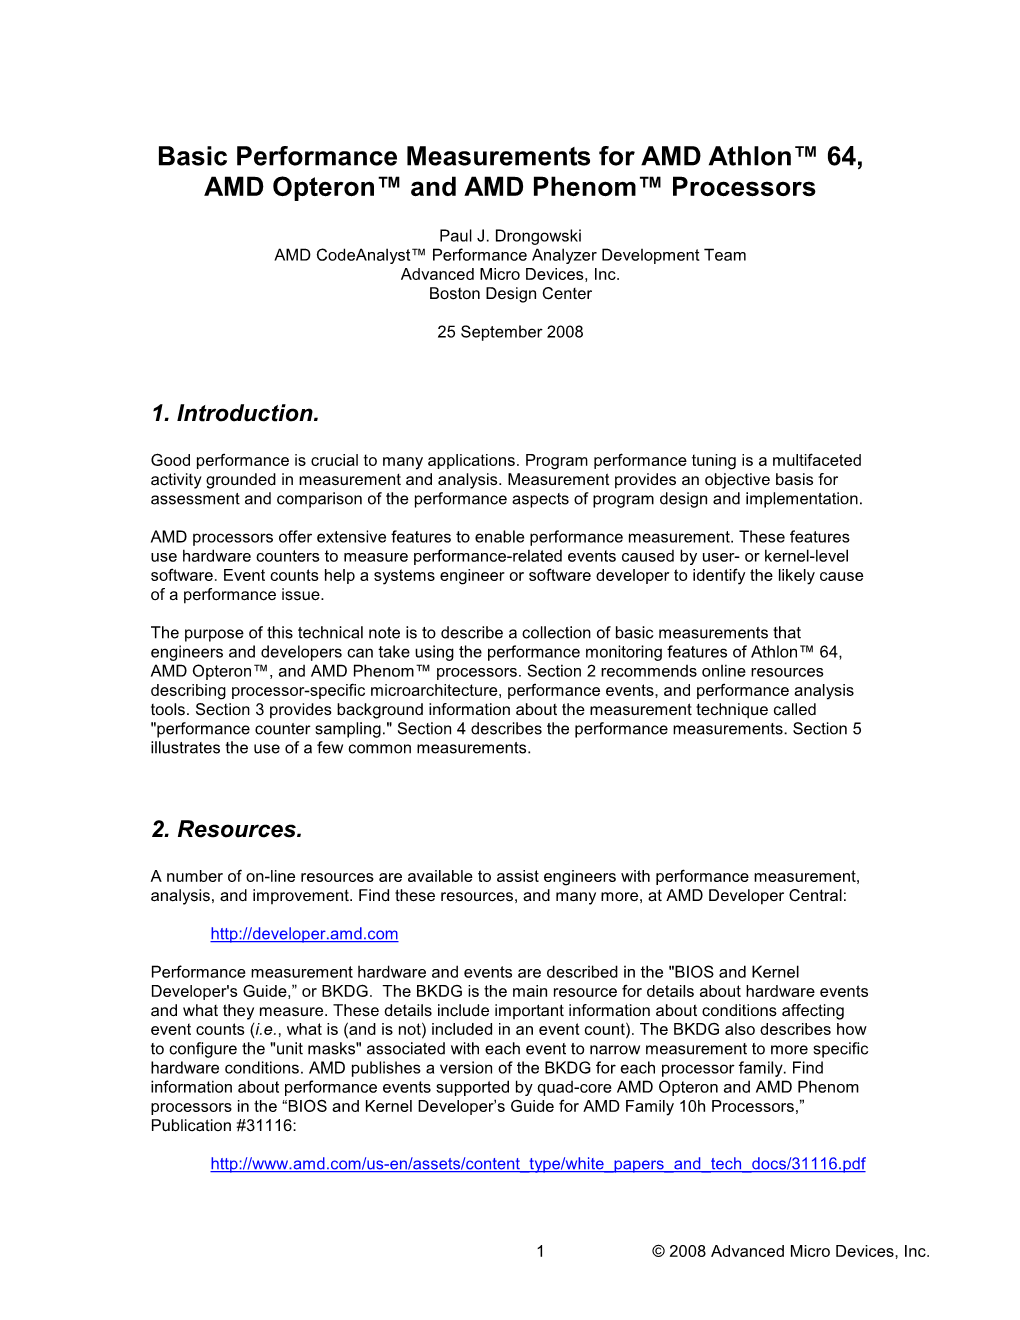 Basic Performance Measurements for AMD Athlon™ 64, AMD Opteron™ and AMD Phenom™ Processors